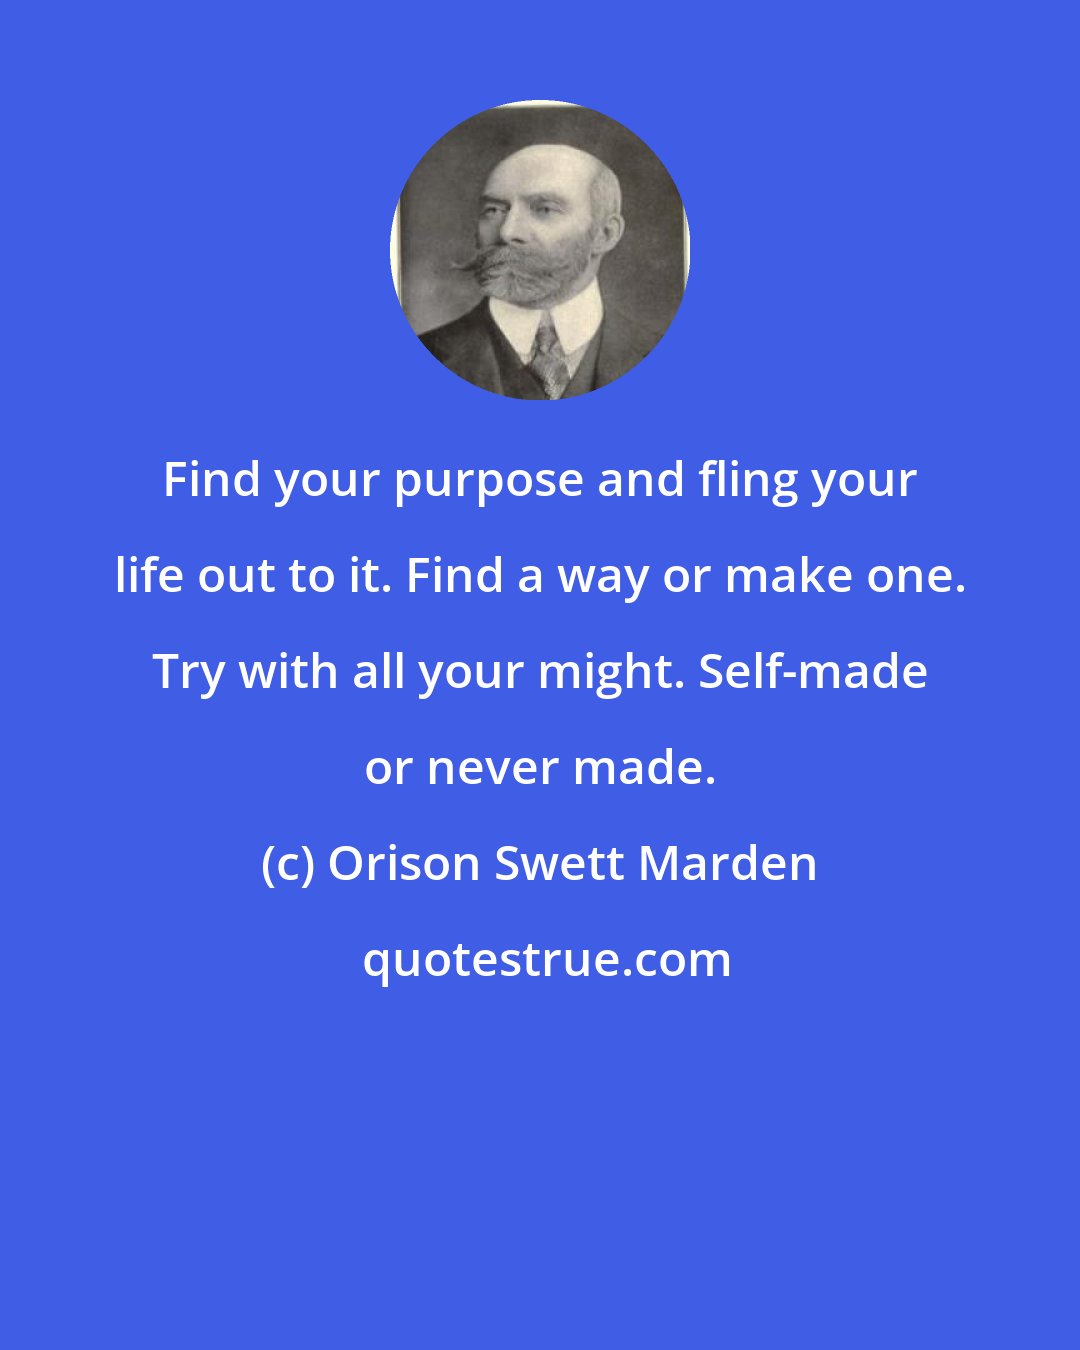 Orison Swett Marden: Find your purpose and fling your life out to it. Find a way or make one. Try with all your might. Self-made or never made.